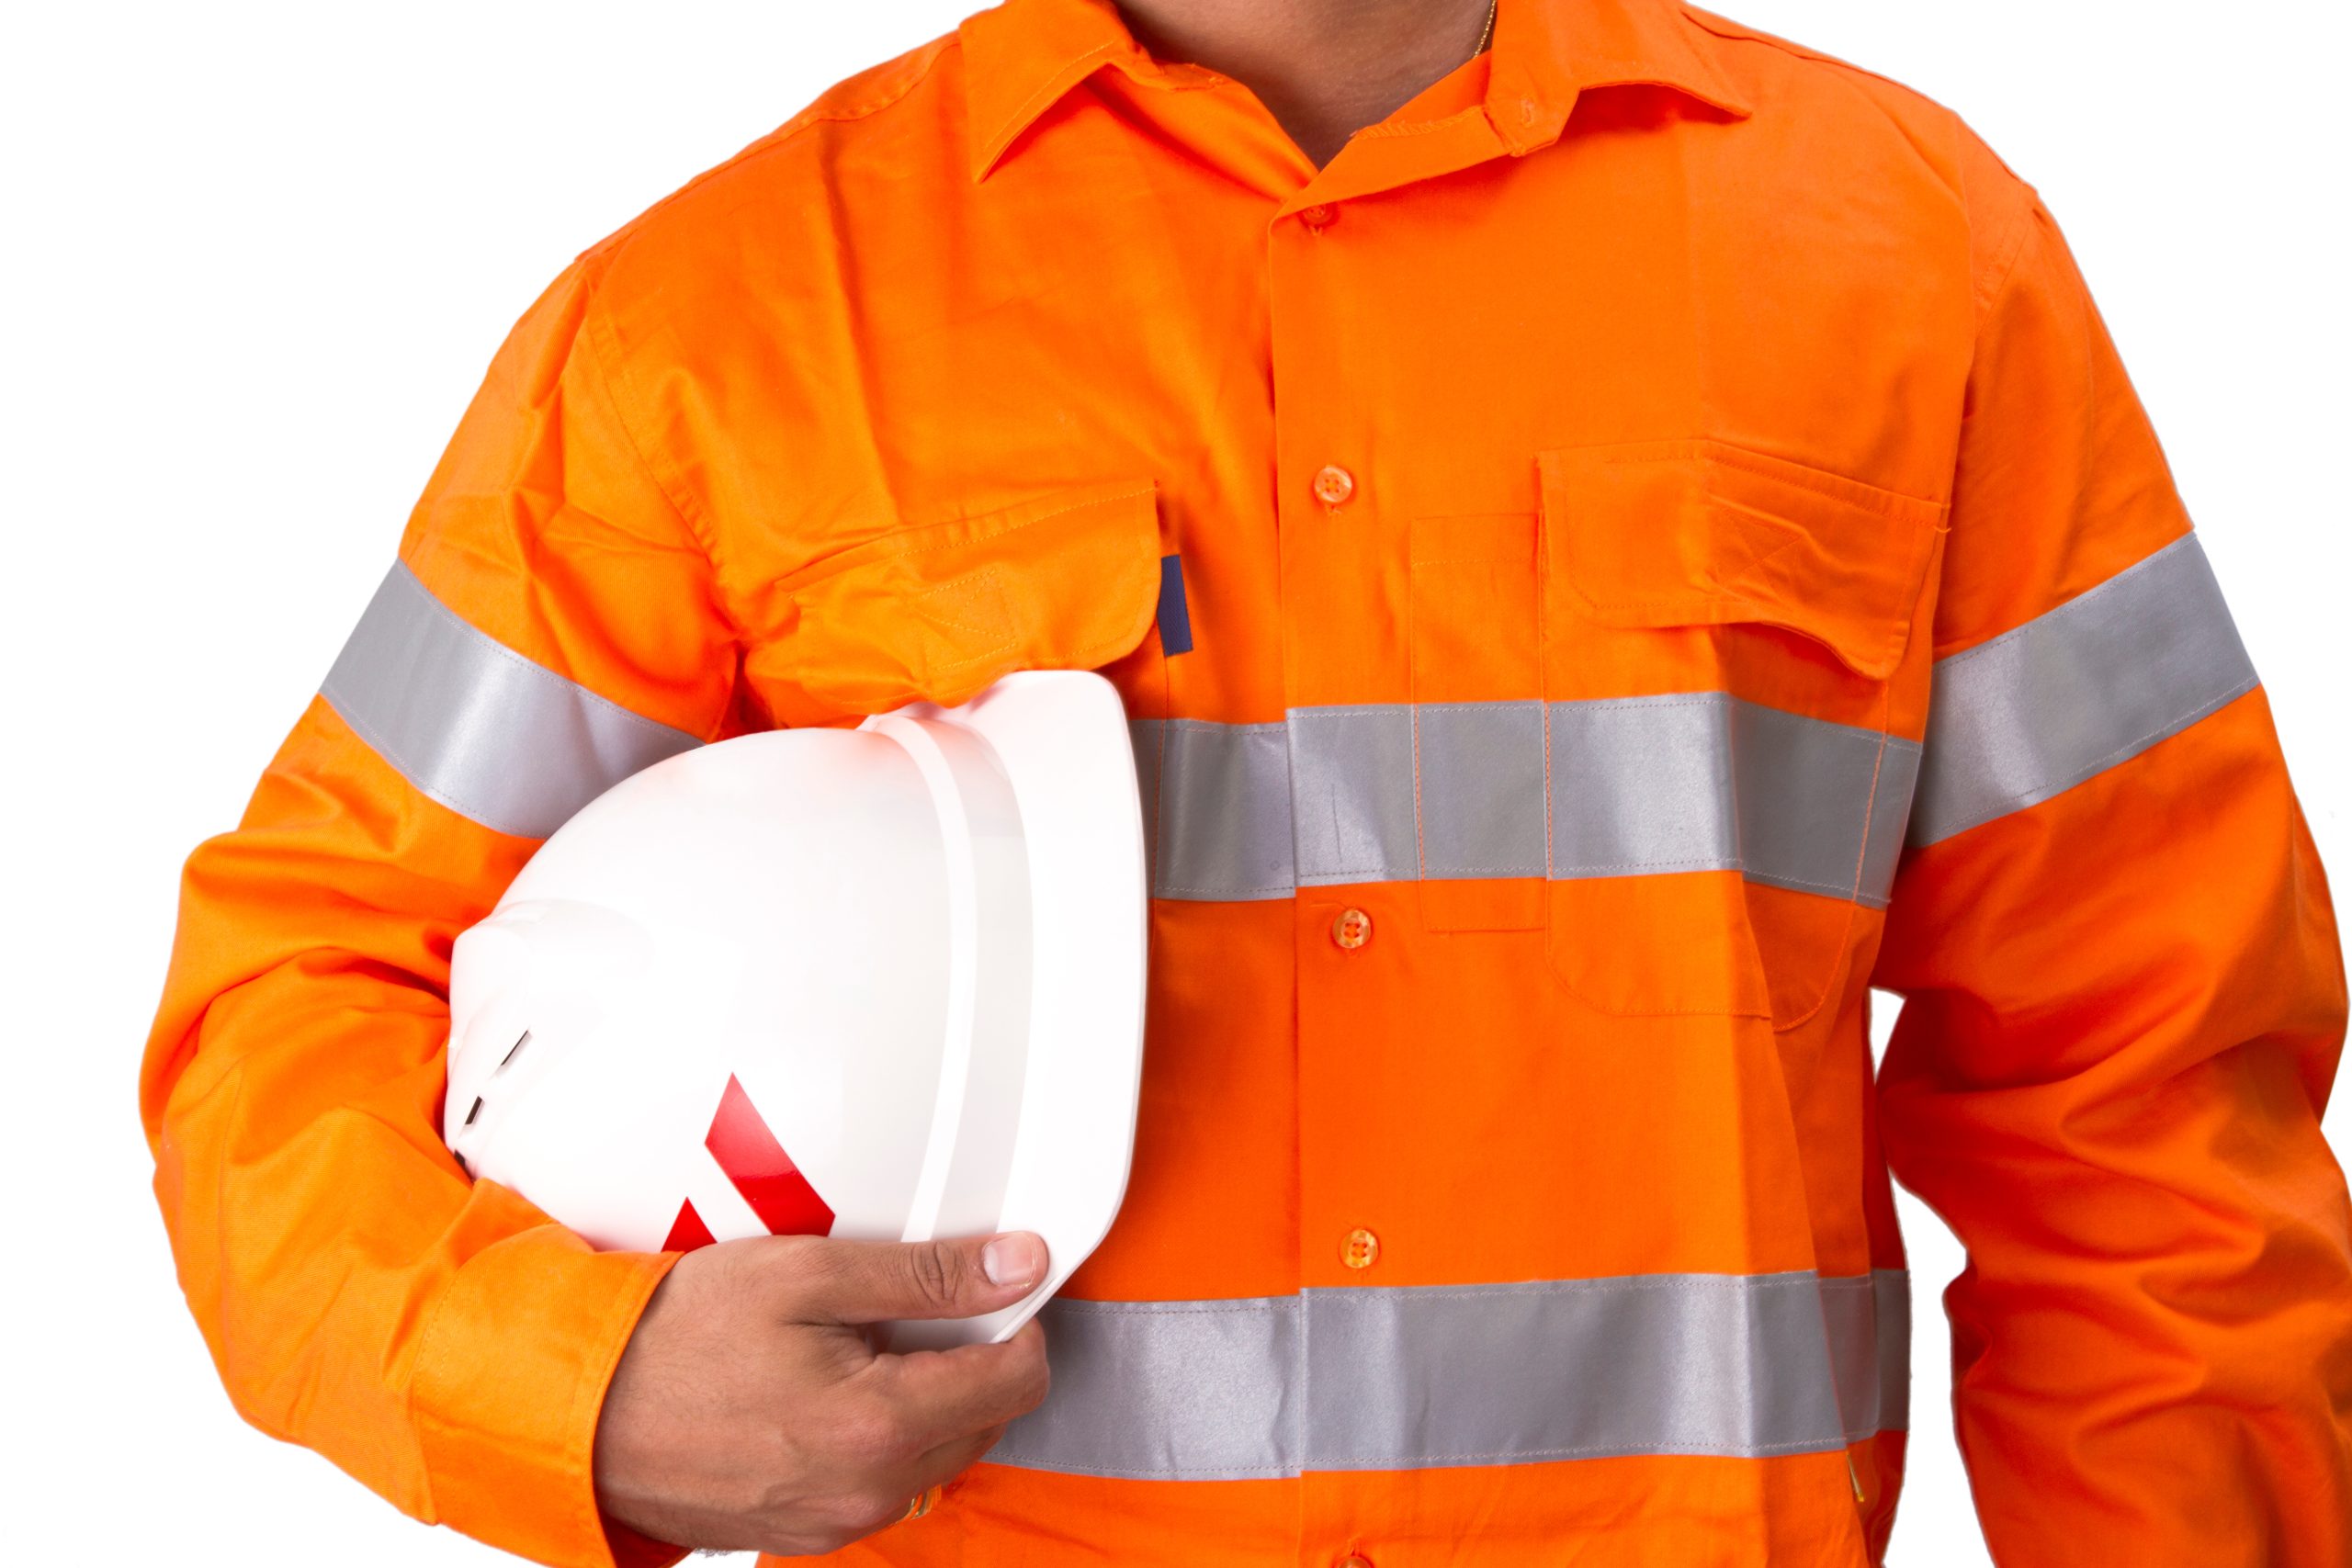 Supervisor with construction hard hat and high visibility shirt on a white background. Men with reflective high visibility orange shirt or work wear for highly visible from all directions in work environment for trade jobs or out door employees.